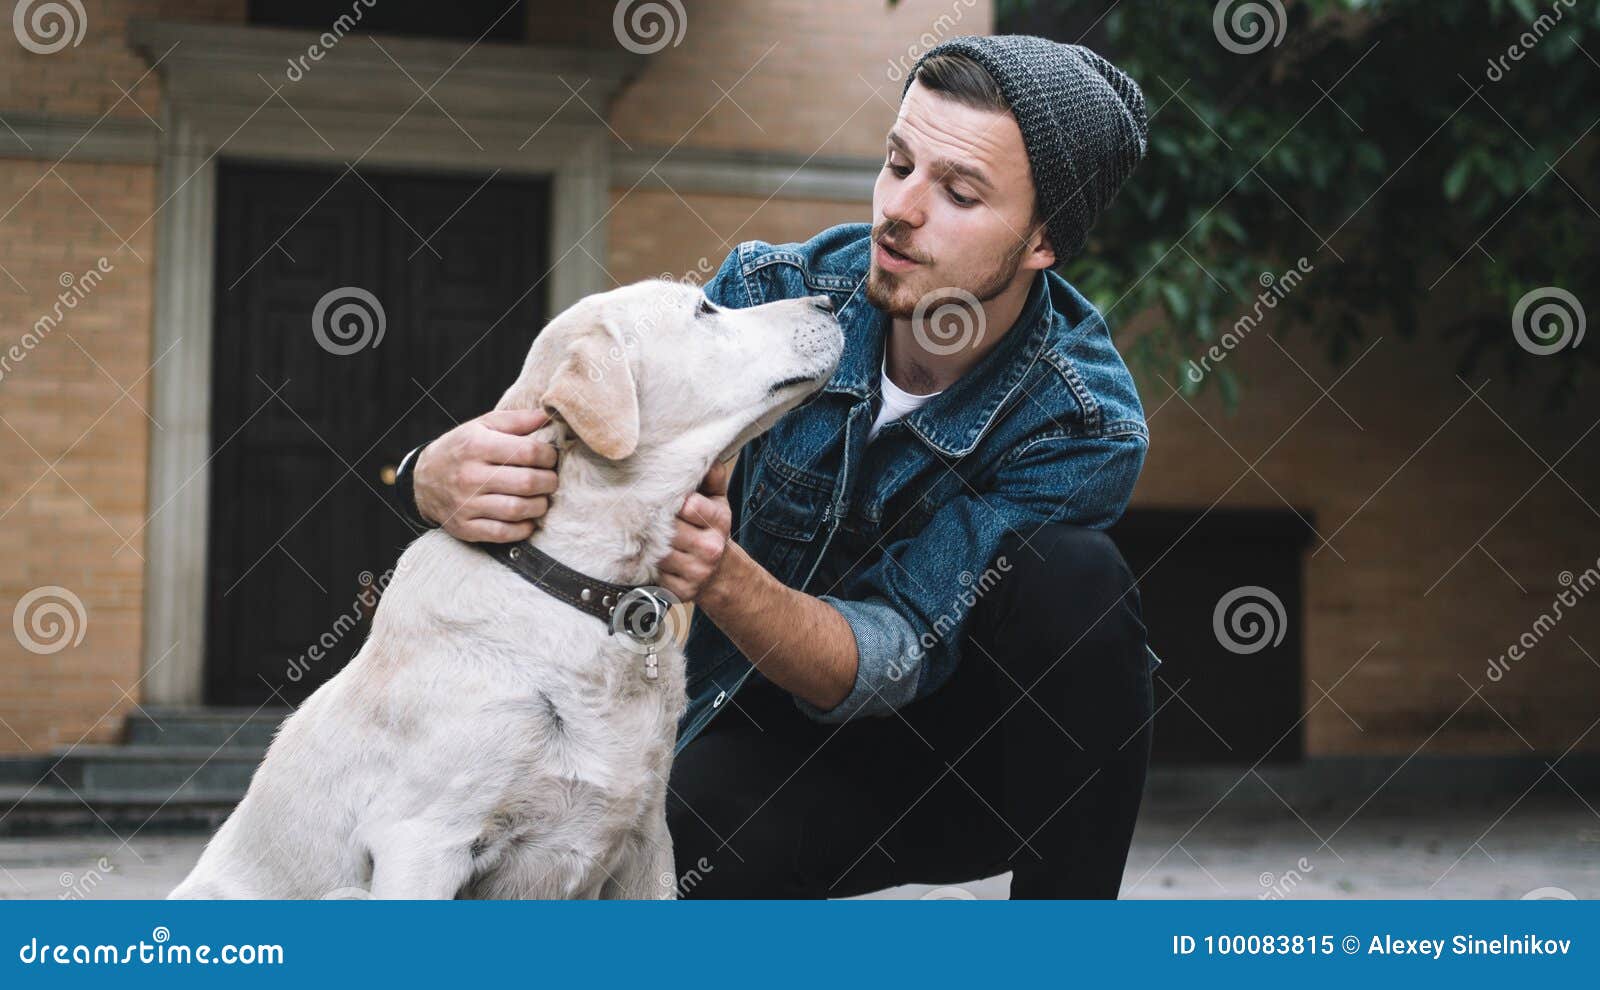 a guy with a dog